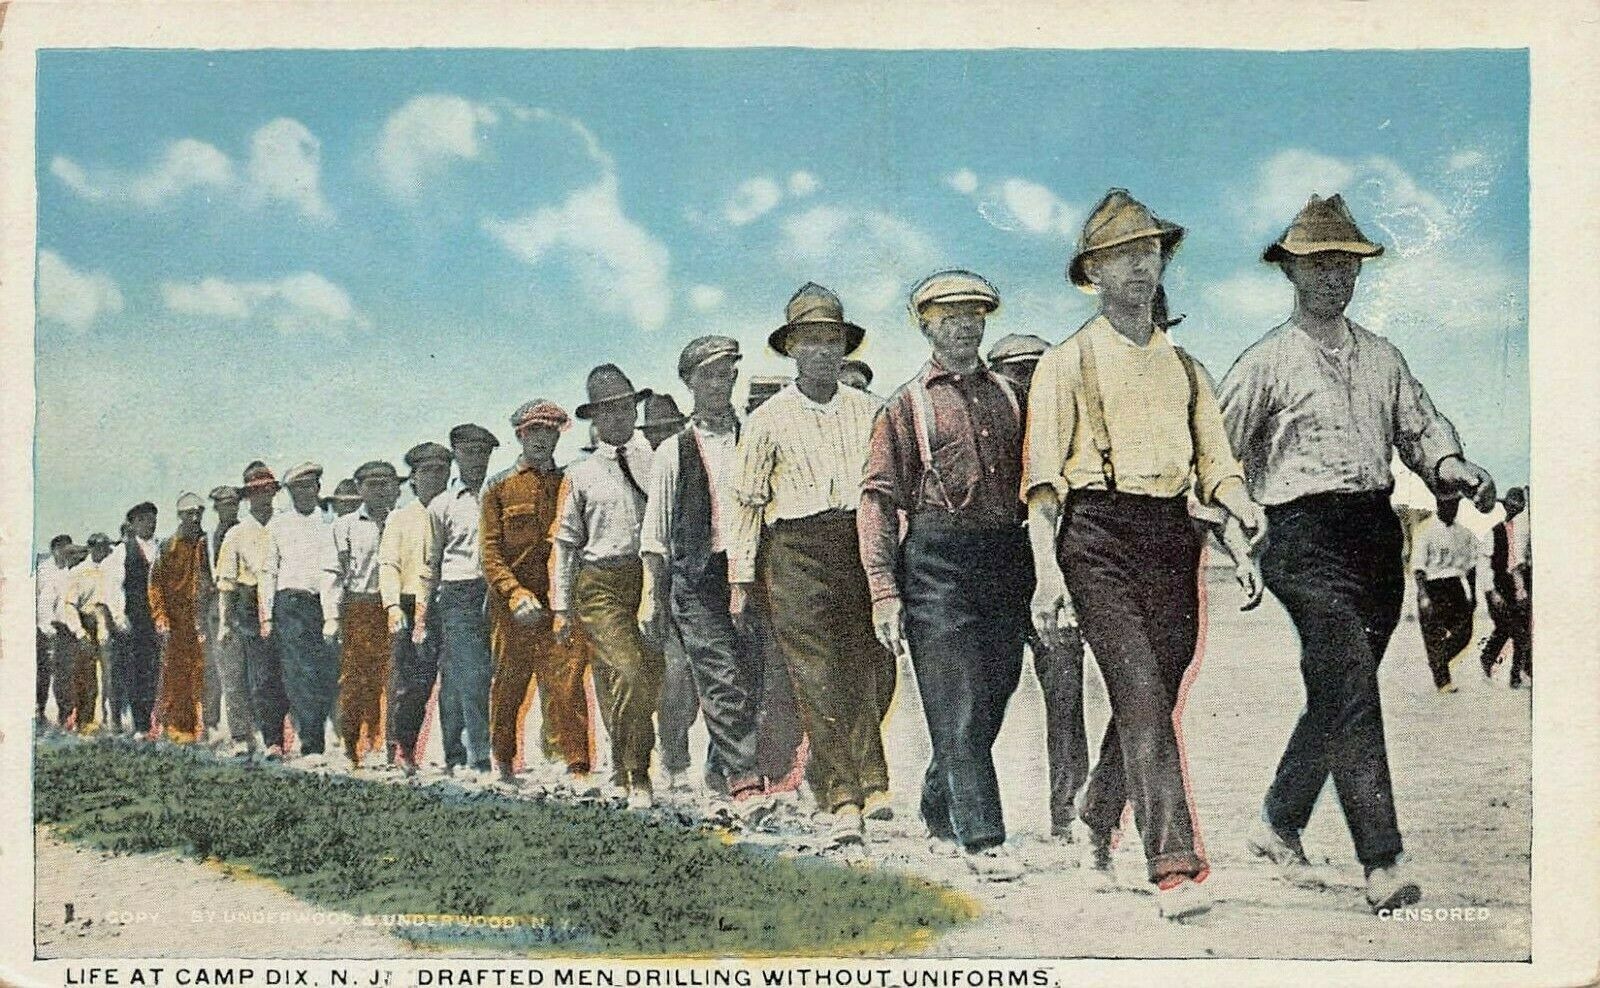 U.S. Army, Drafted Men Drilling without Uniforms, Camp Dix, N.J., WWI  Postcard